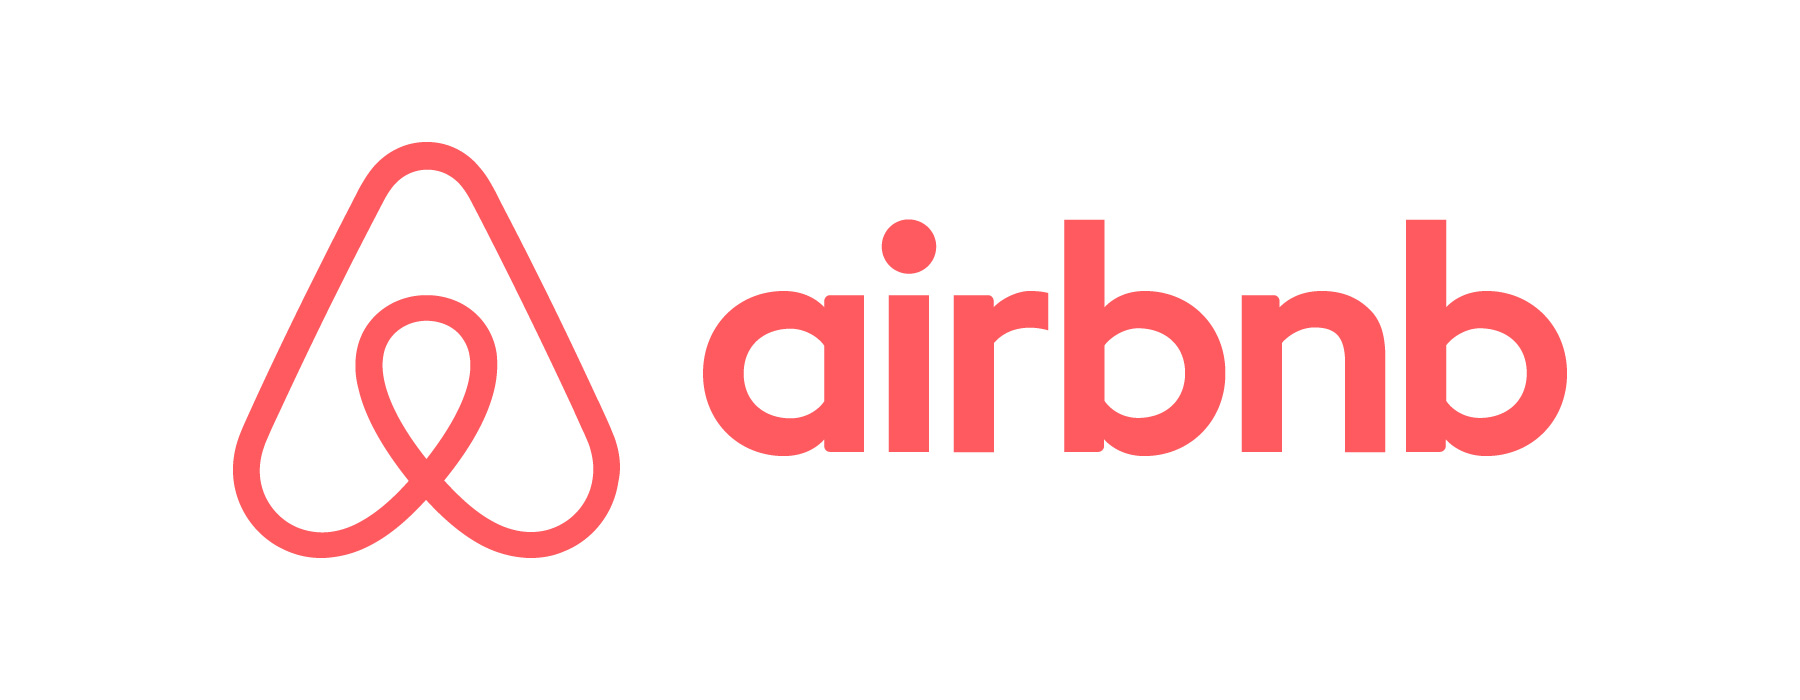 Does Airbnb take Apple Pay?